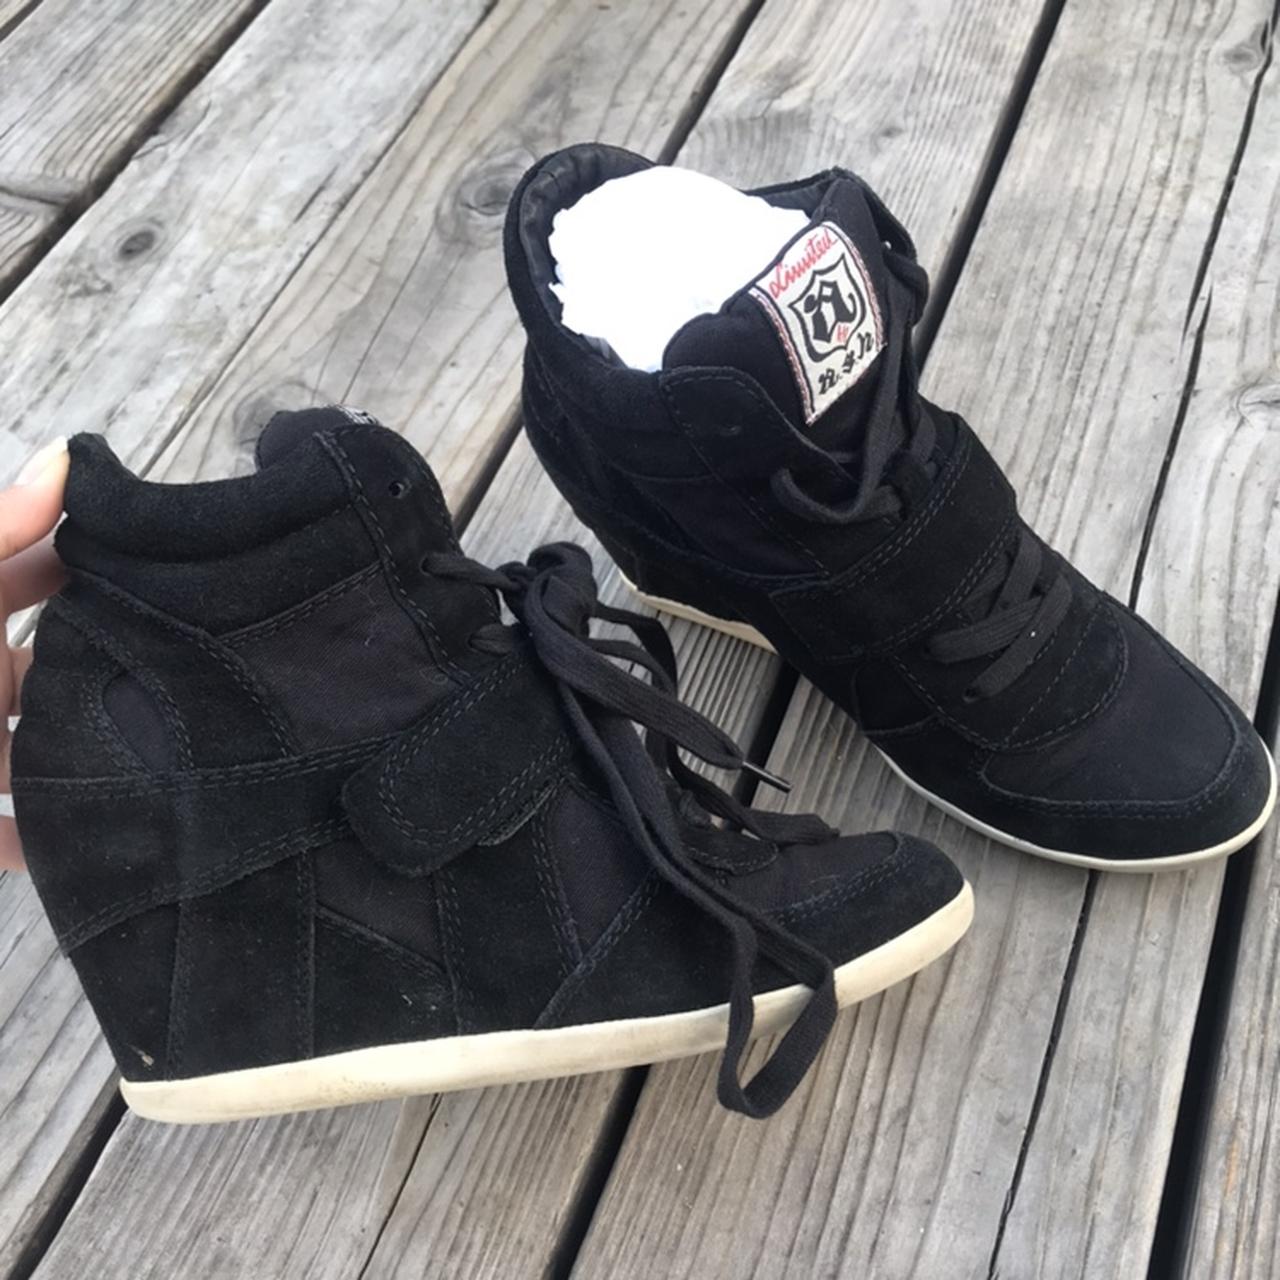 ASH Bowie wedge sneakers 🖤 38 EU which is a... - Depop